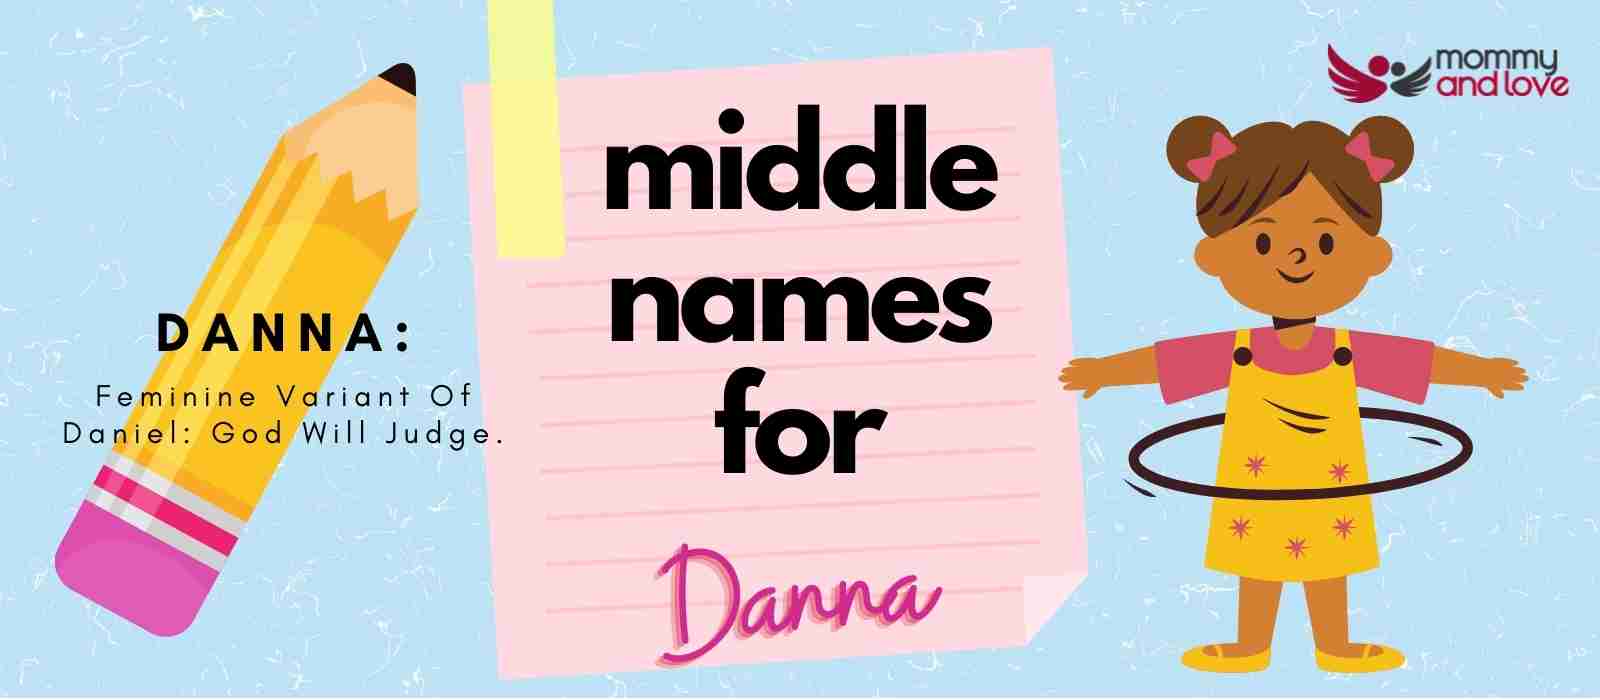 Middle Names for Danna